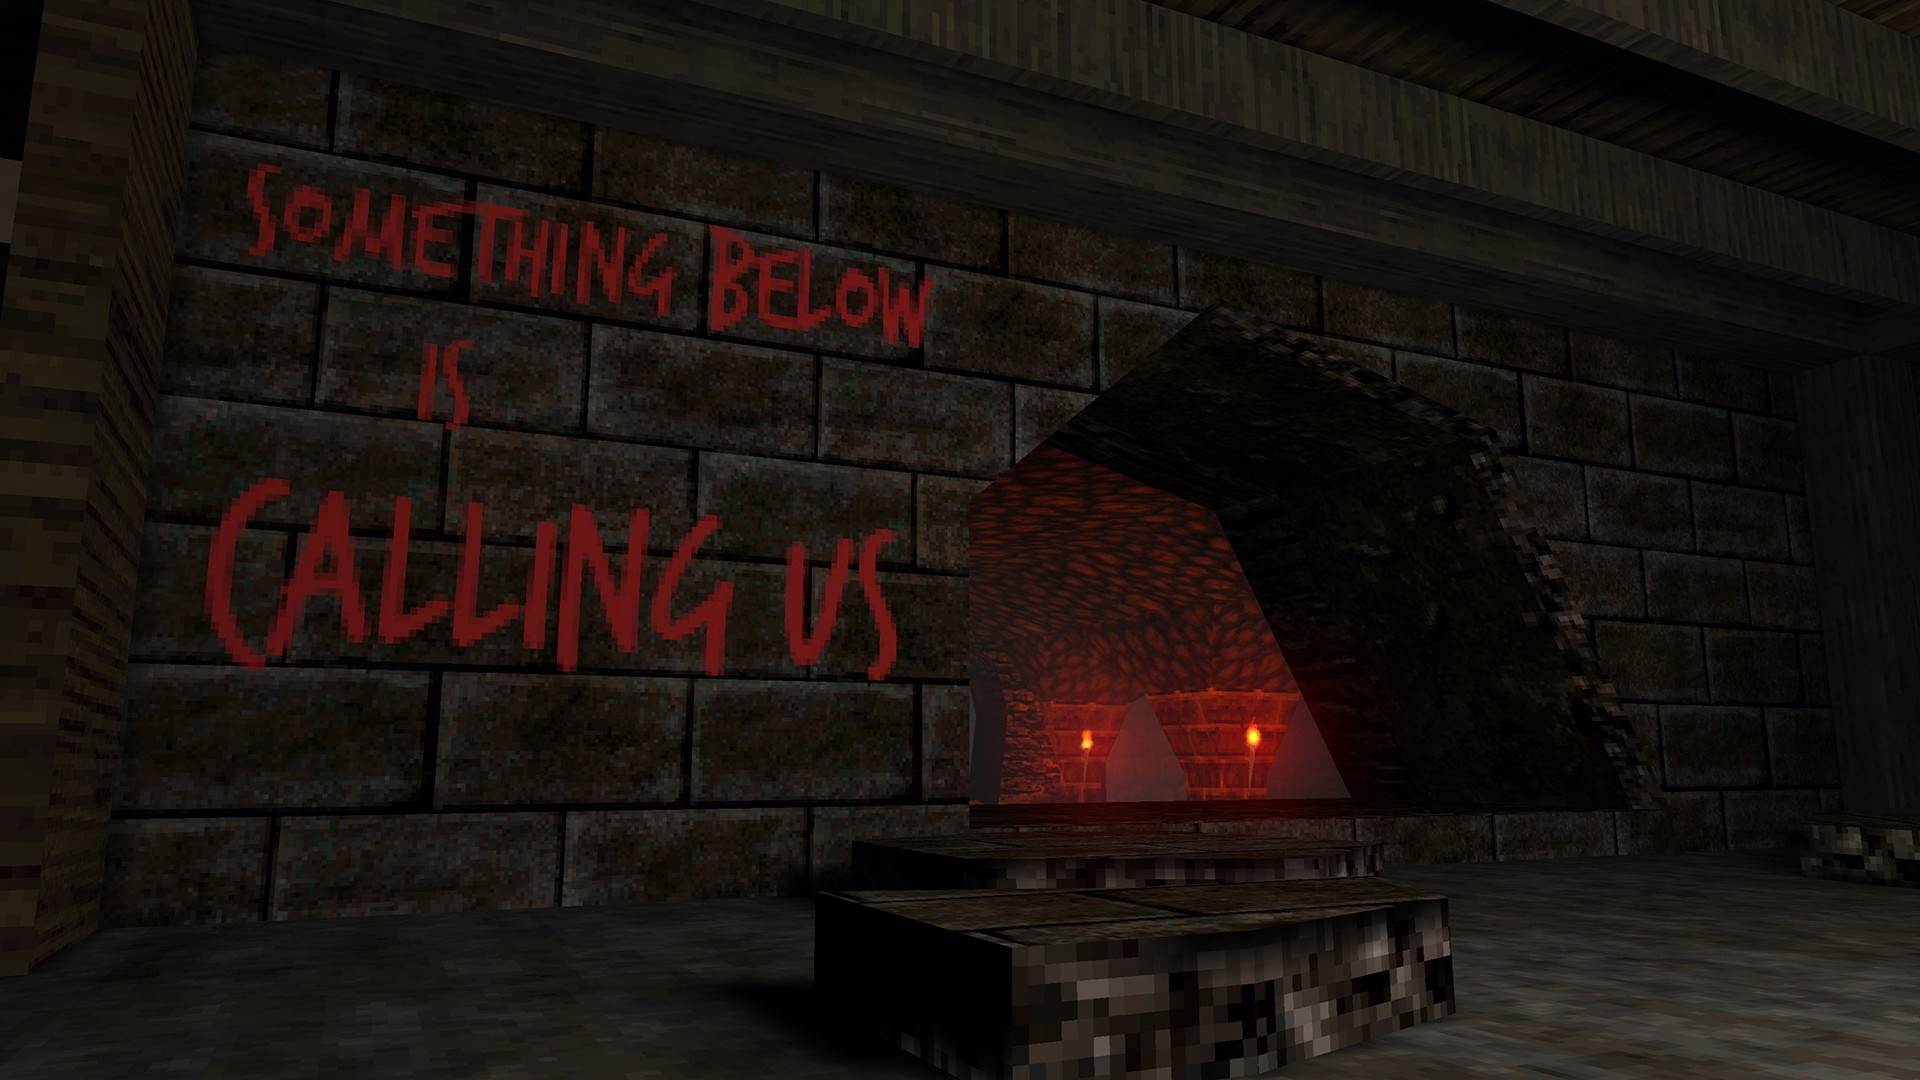 Best retro games: Dusk. Image shows a dark chamber with the words "something below is calling us" scrawled in red on the wall.